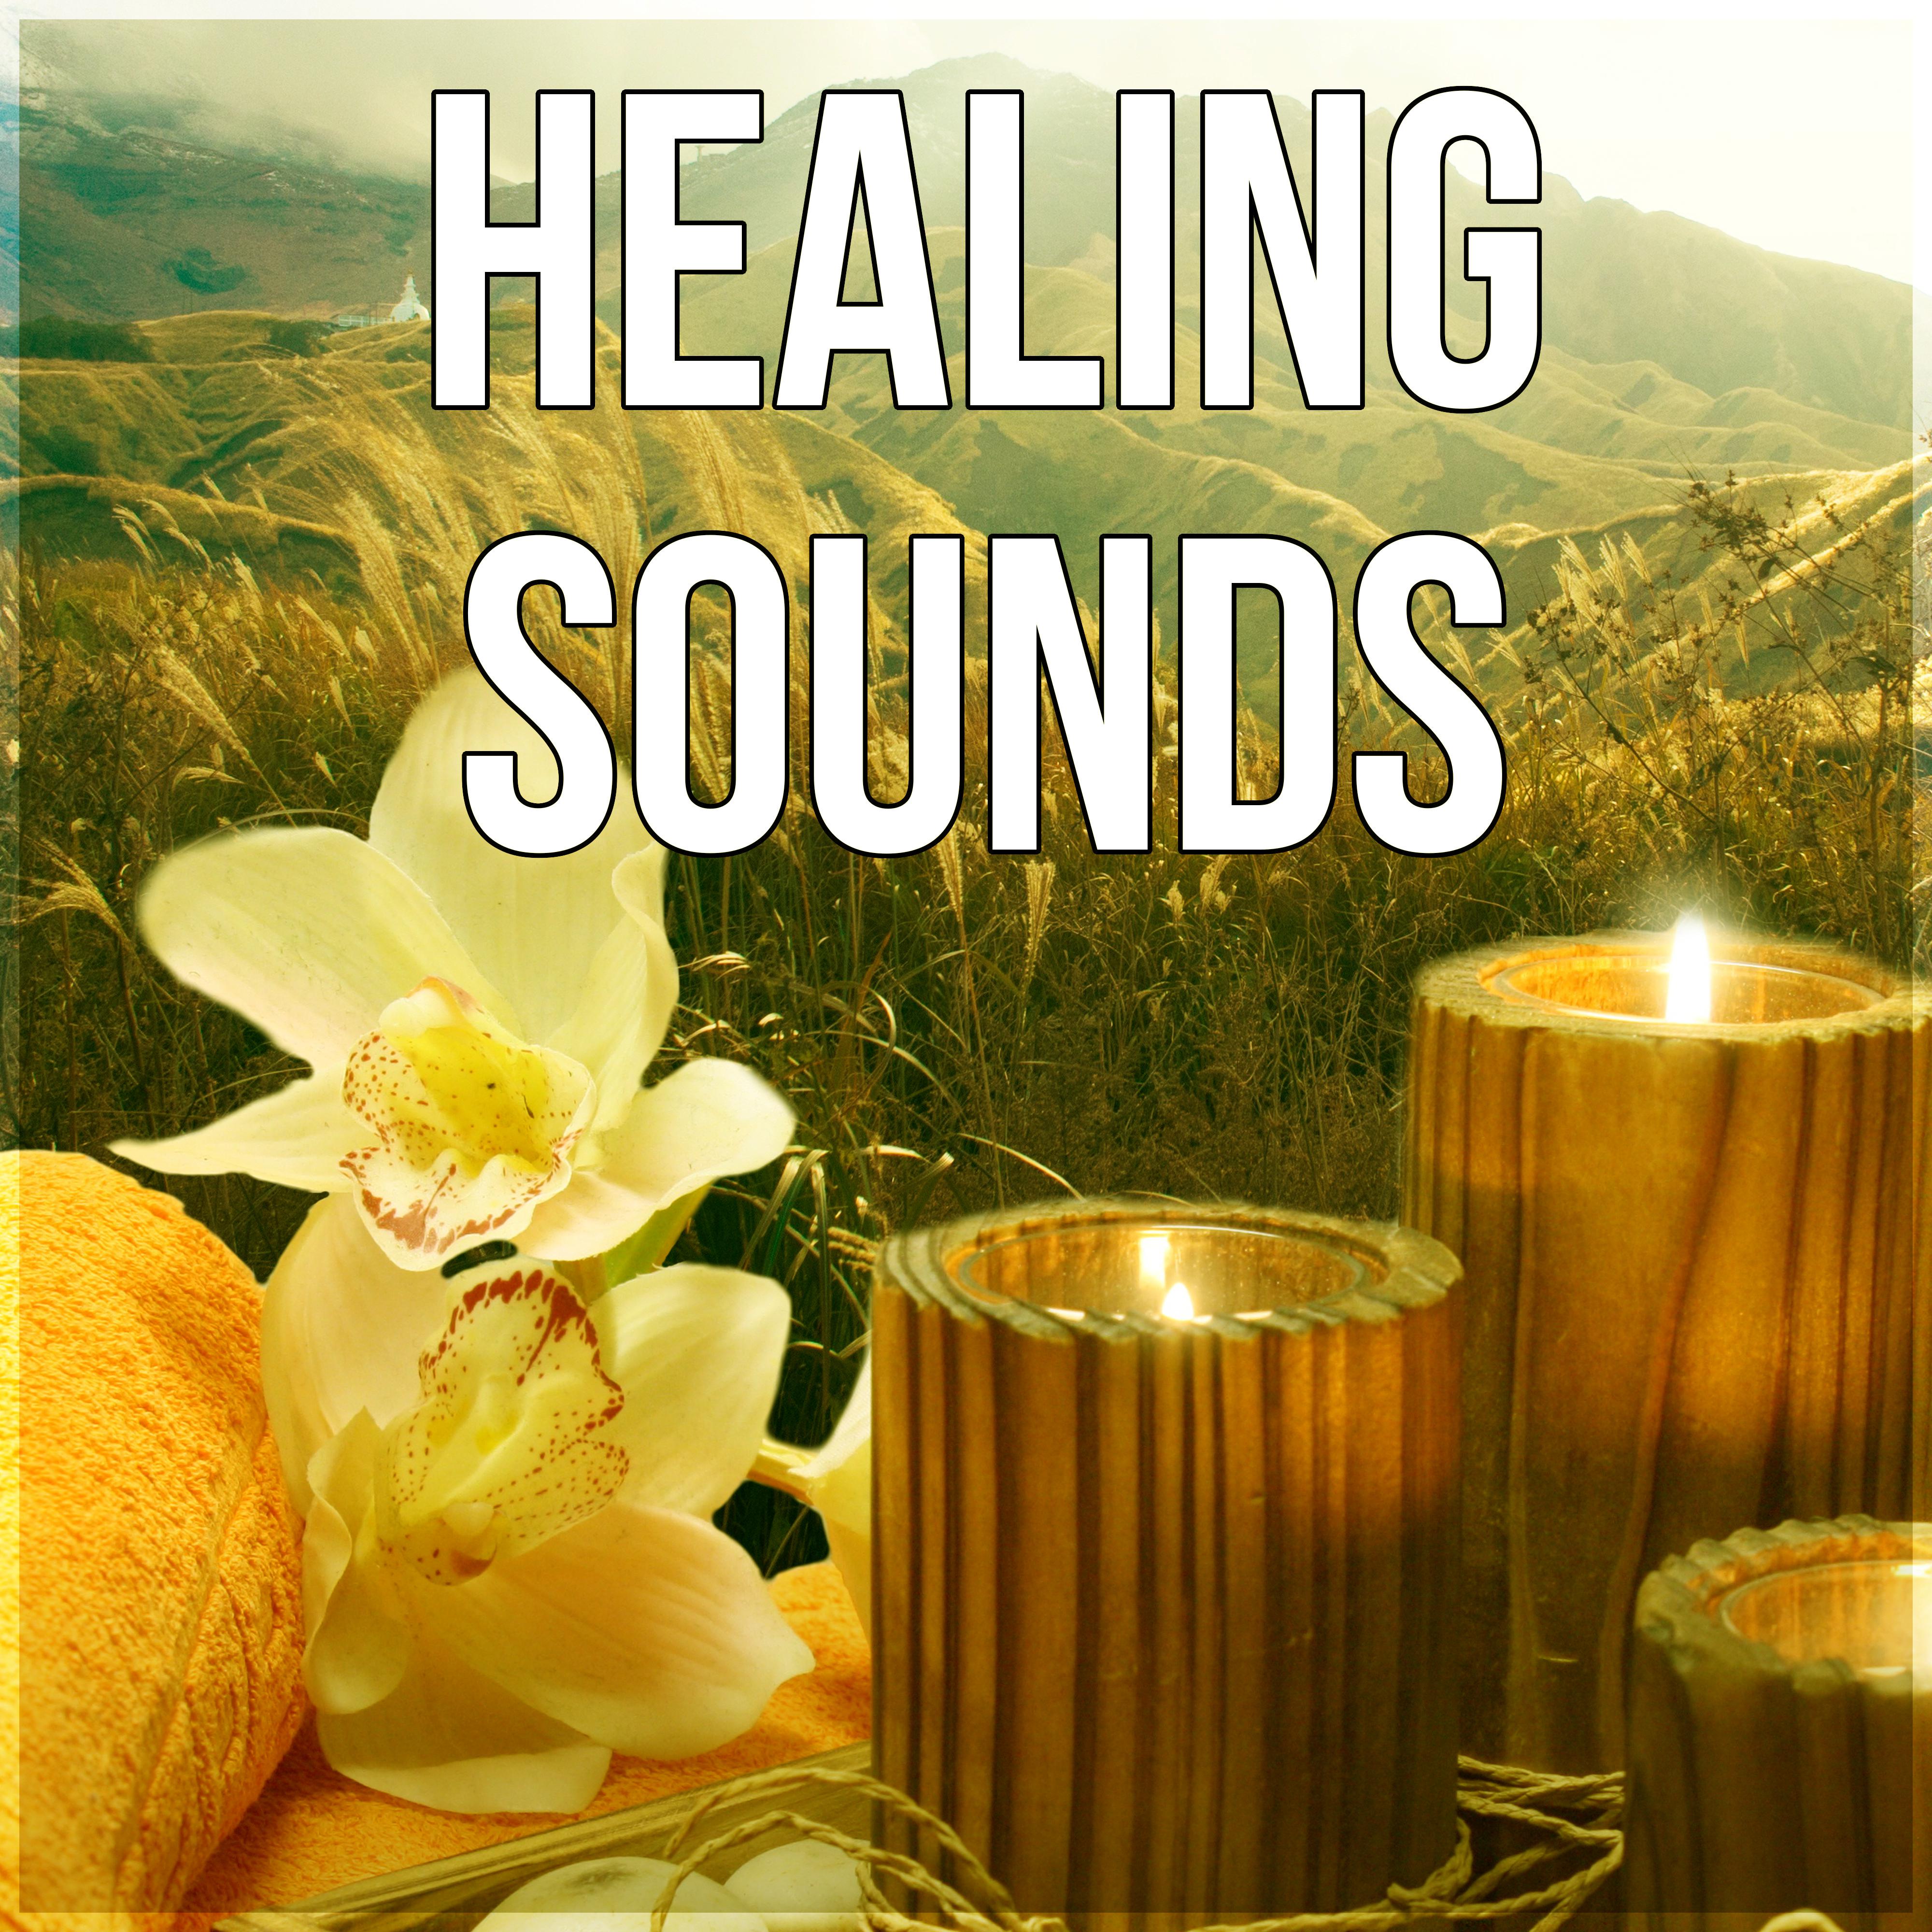 Healing Sounds – Music for Spa, Music Background, Massage Therapy, Waves, Calm Music, New Age